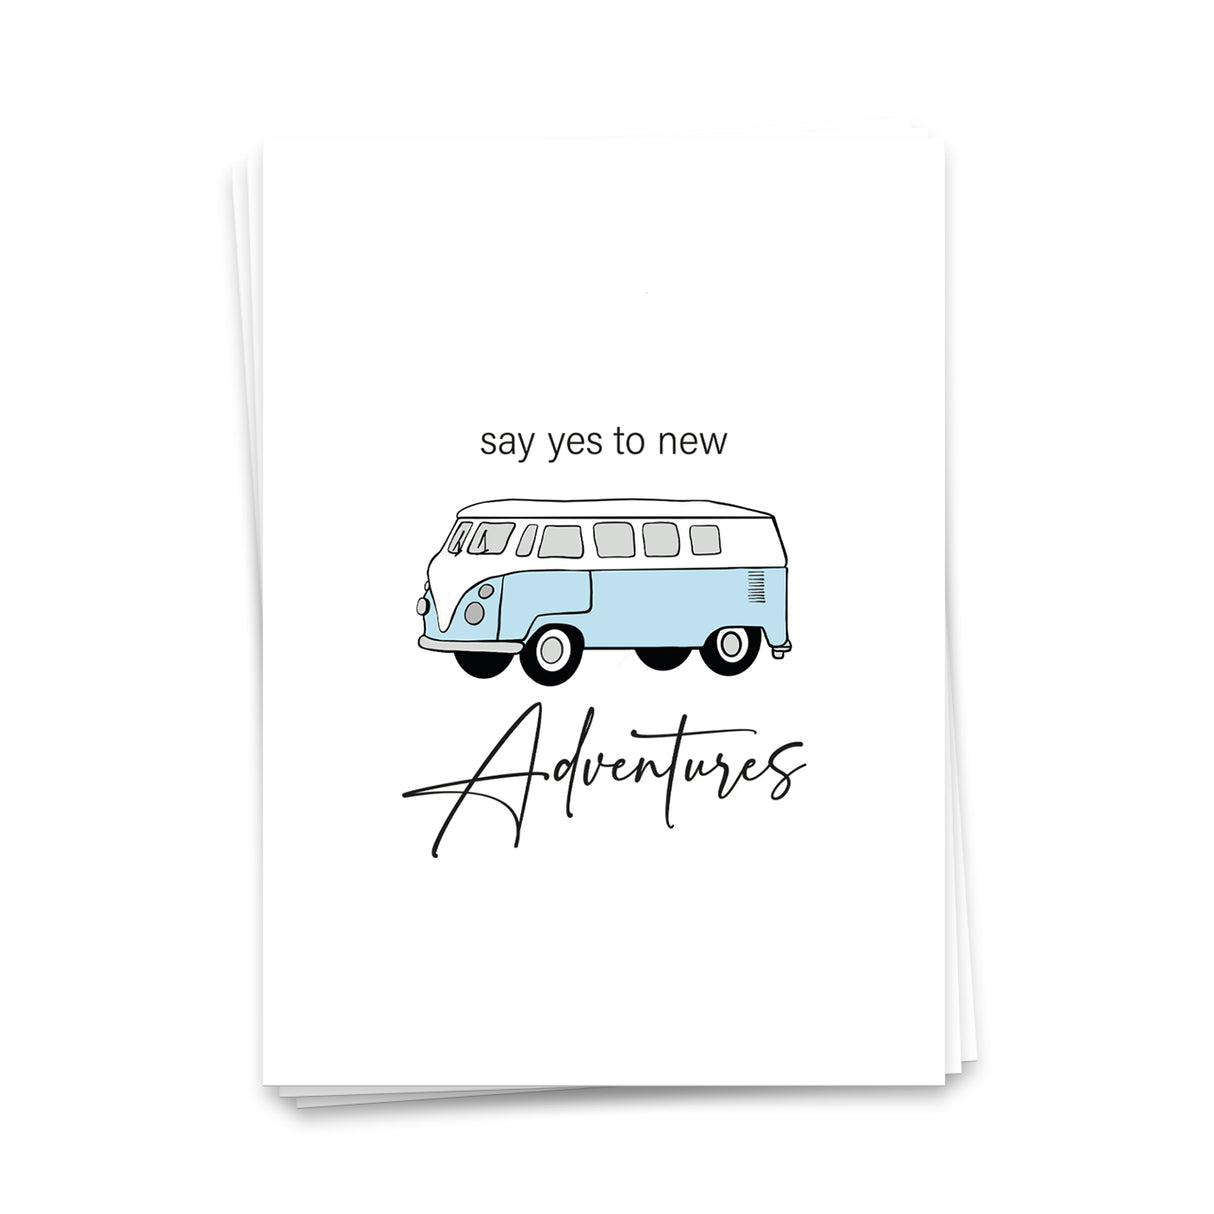 Say yes to new adventures - Postkarte